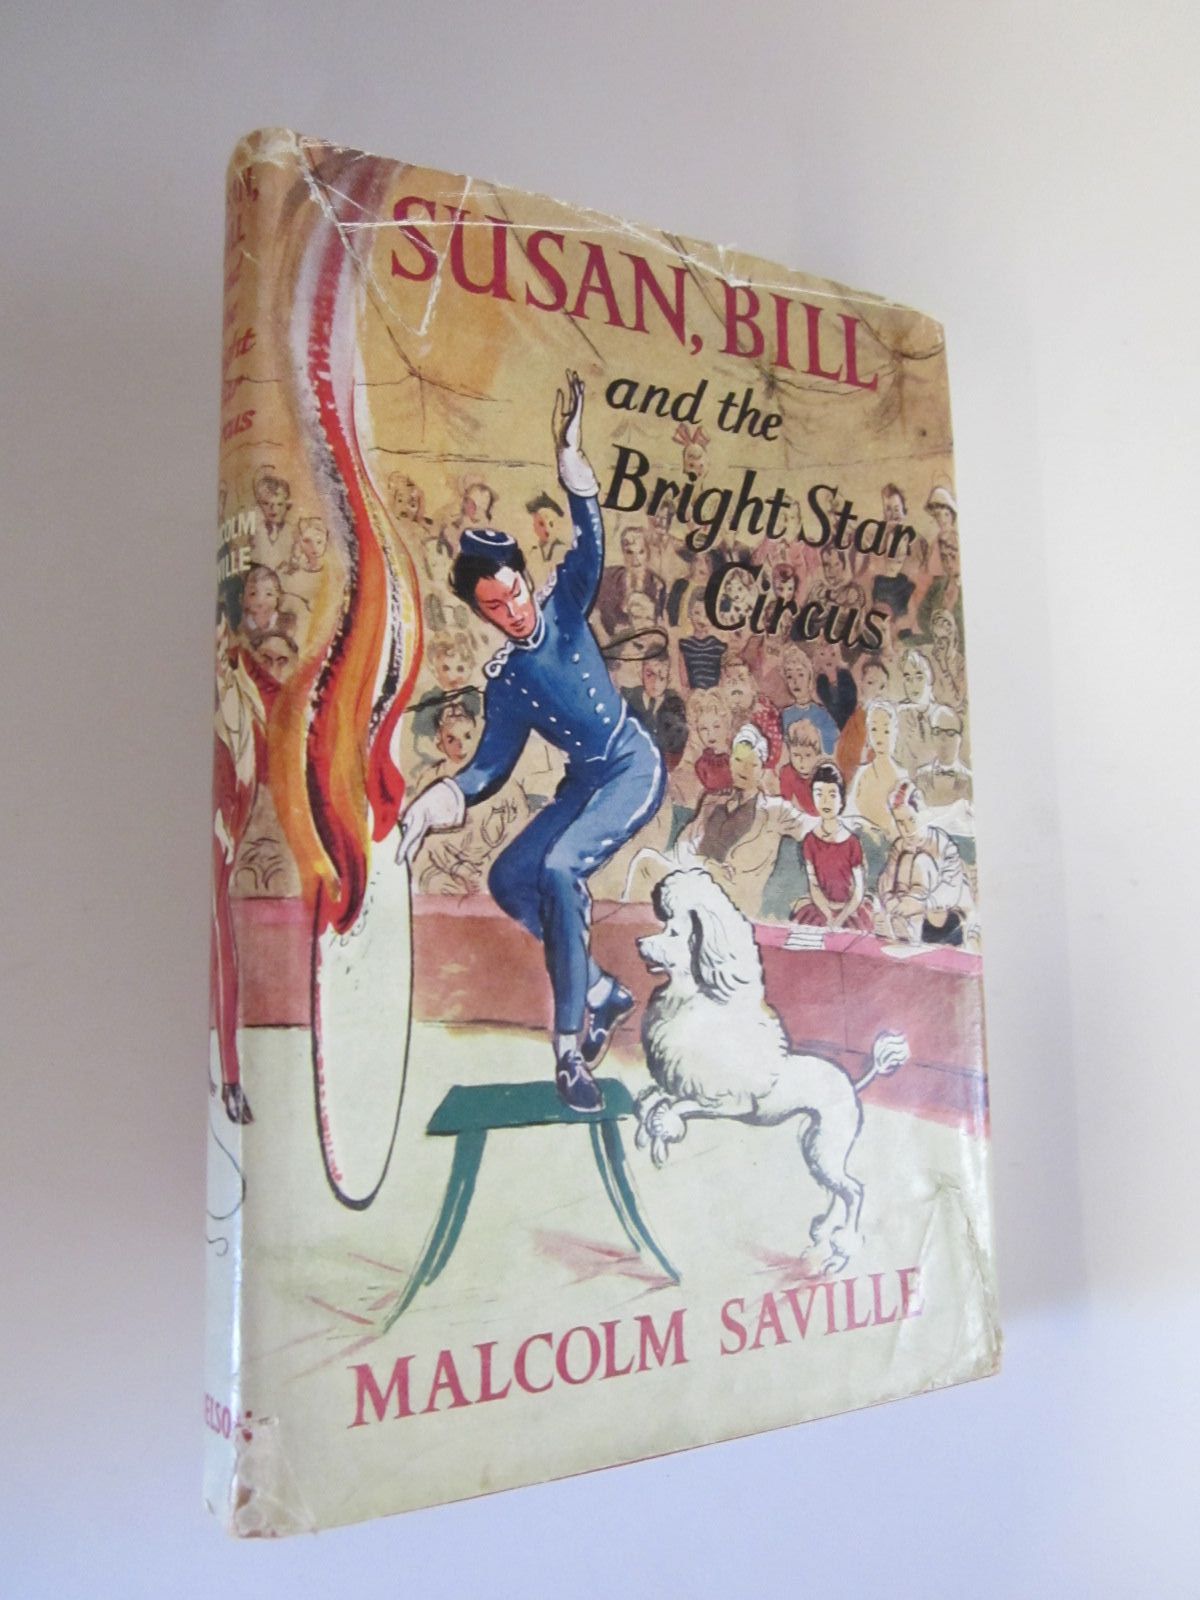 Cover of SUSAN, BILL AND THE BRIGHT STAR CIRCUS by Malcolm Saville